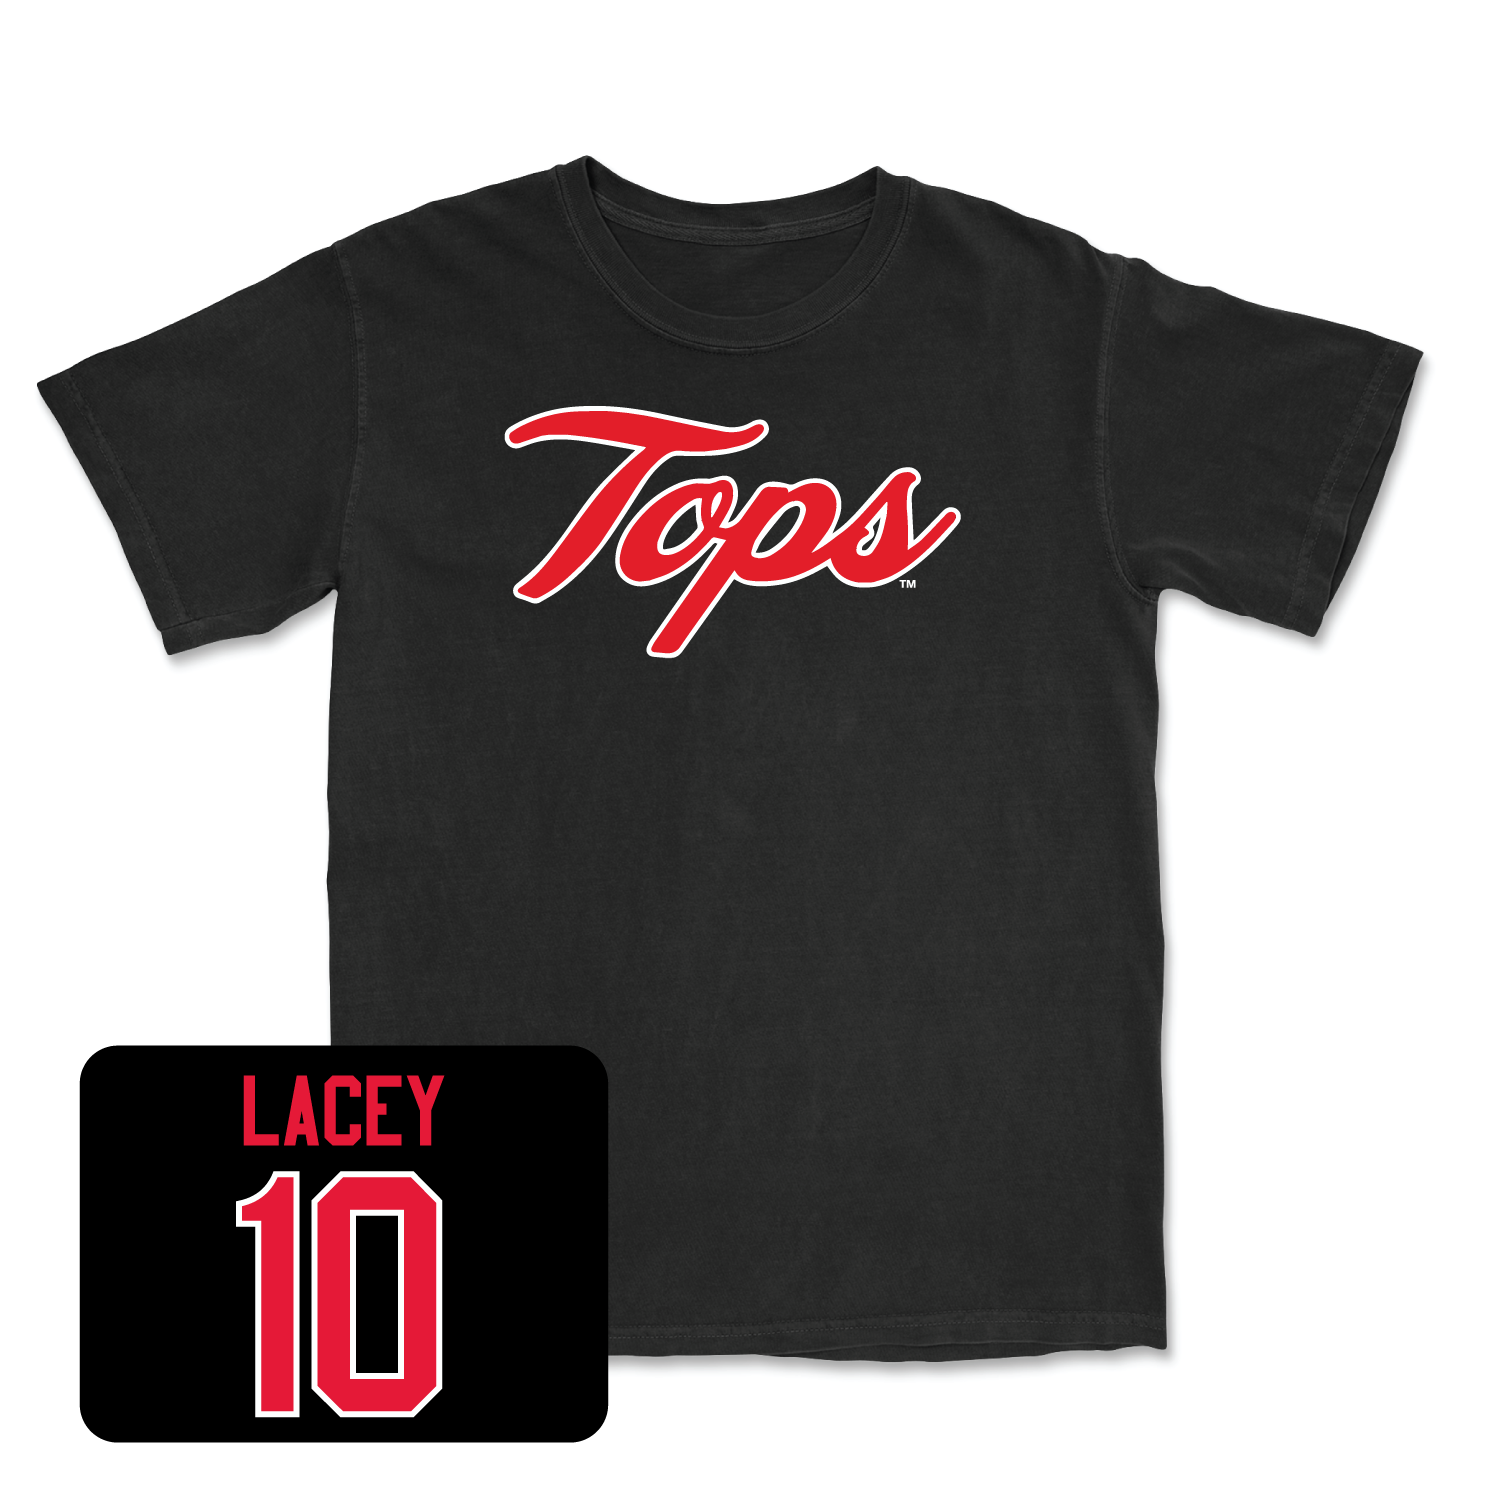 Black Women's Soccer Tops Tee 3 Youth Large / Paige Lacey | #10